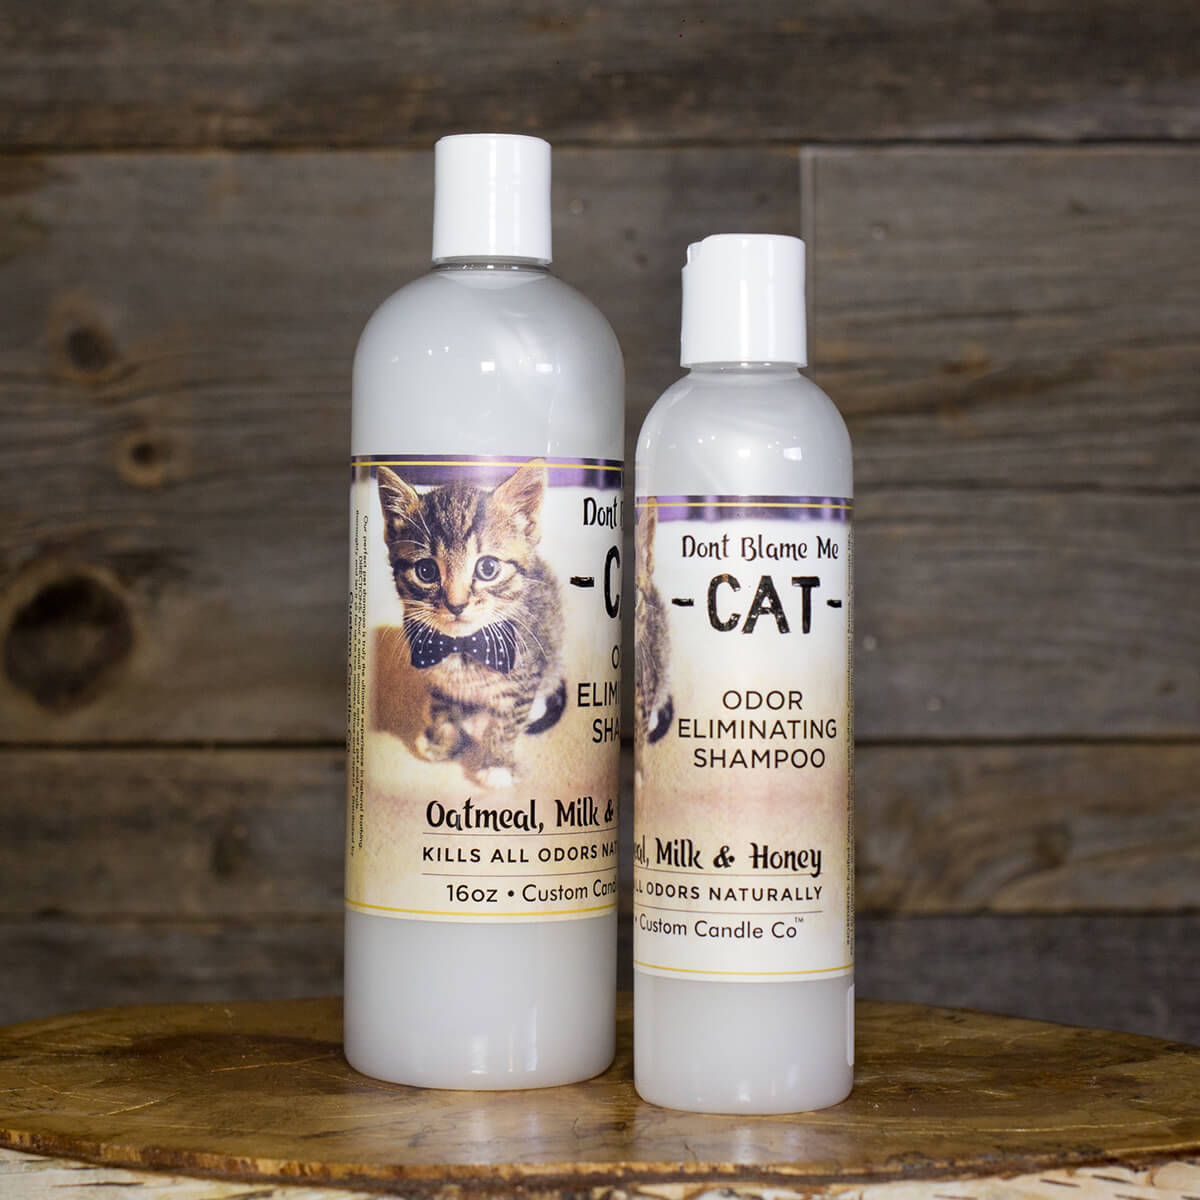 Two bottles of Cat Shampoo - Oatmeal Milk Honey 8oz and 16oz on a wooden table.